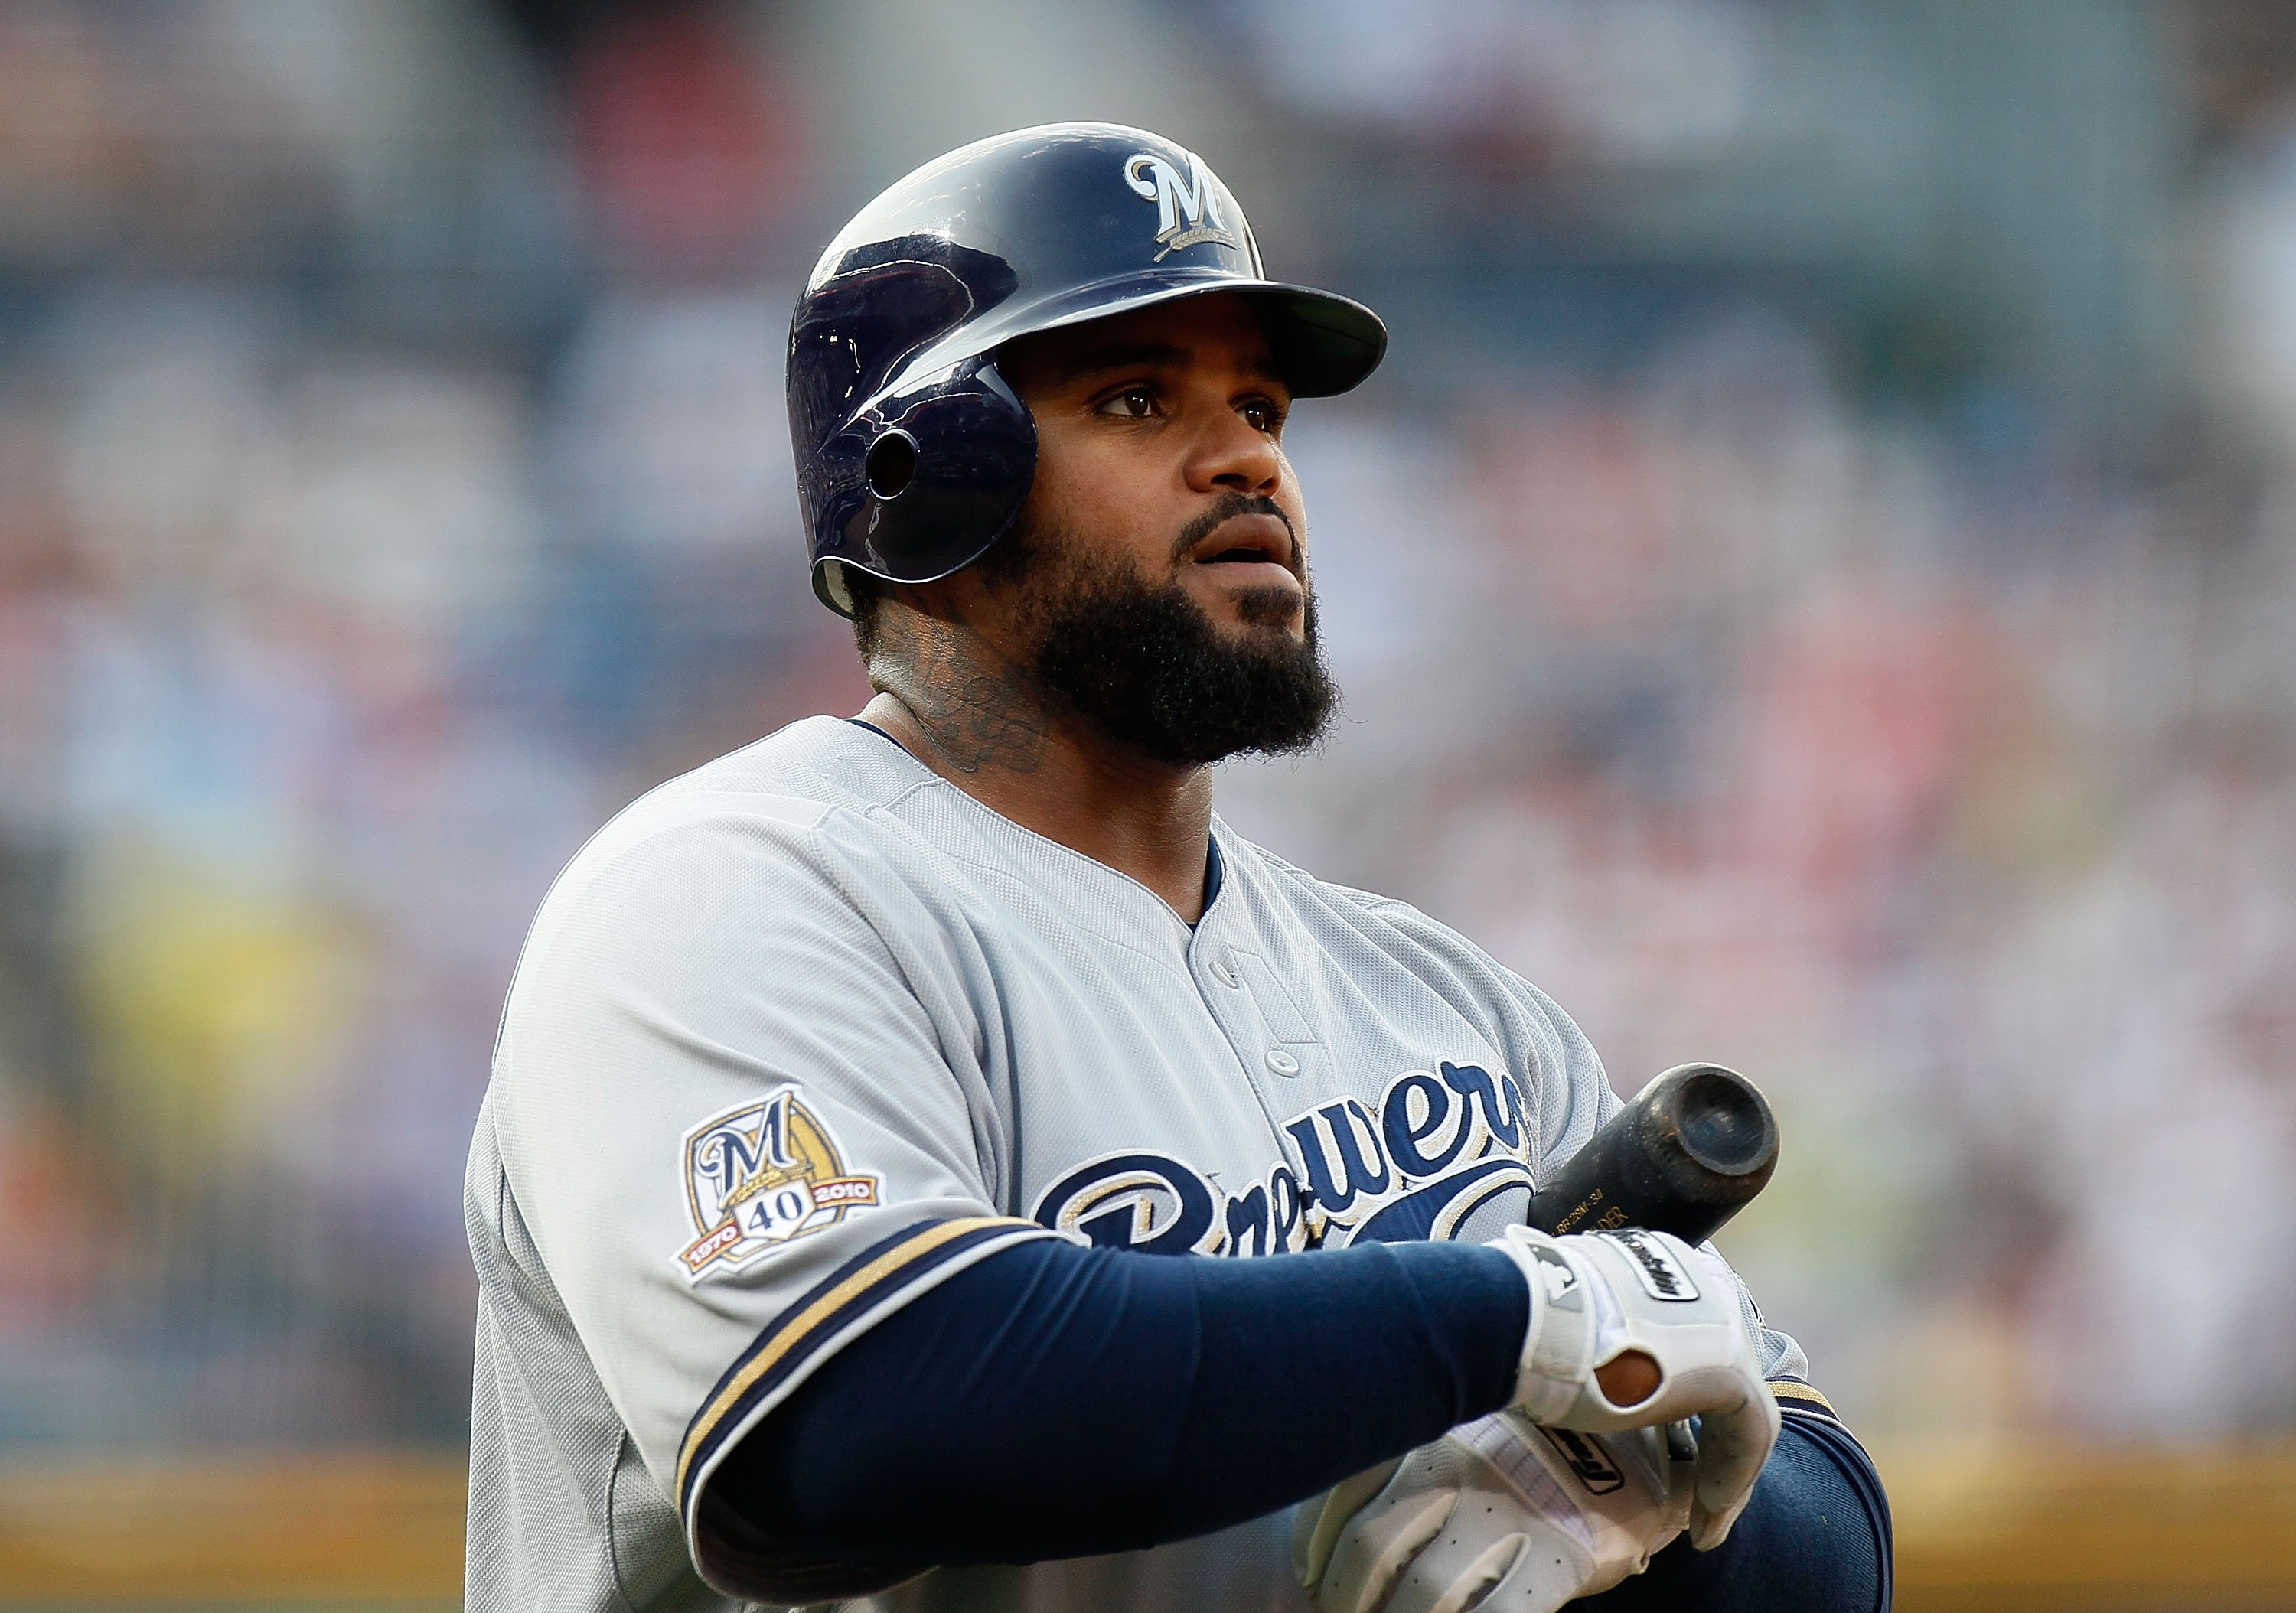 MLB The Show on X: Earn this 💎Home Run Derby Prince Fielder by  collecting: ⭐Team Affinity Season 3 players ⭐2021 Home Run Derby players ⭐ 2021 All-Star players (arriving tonight after the game)